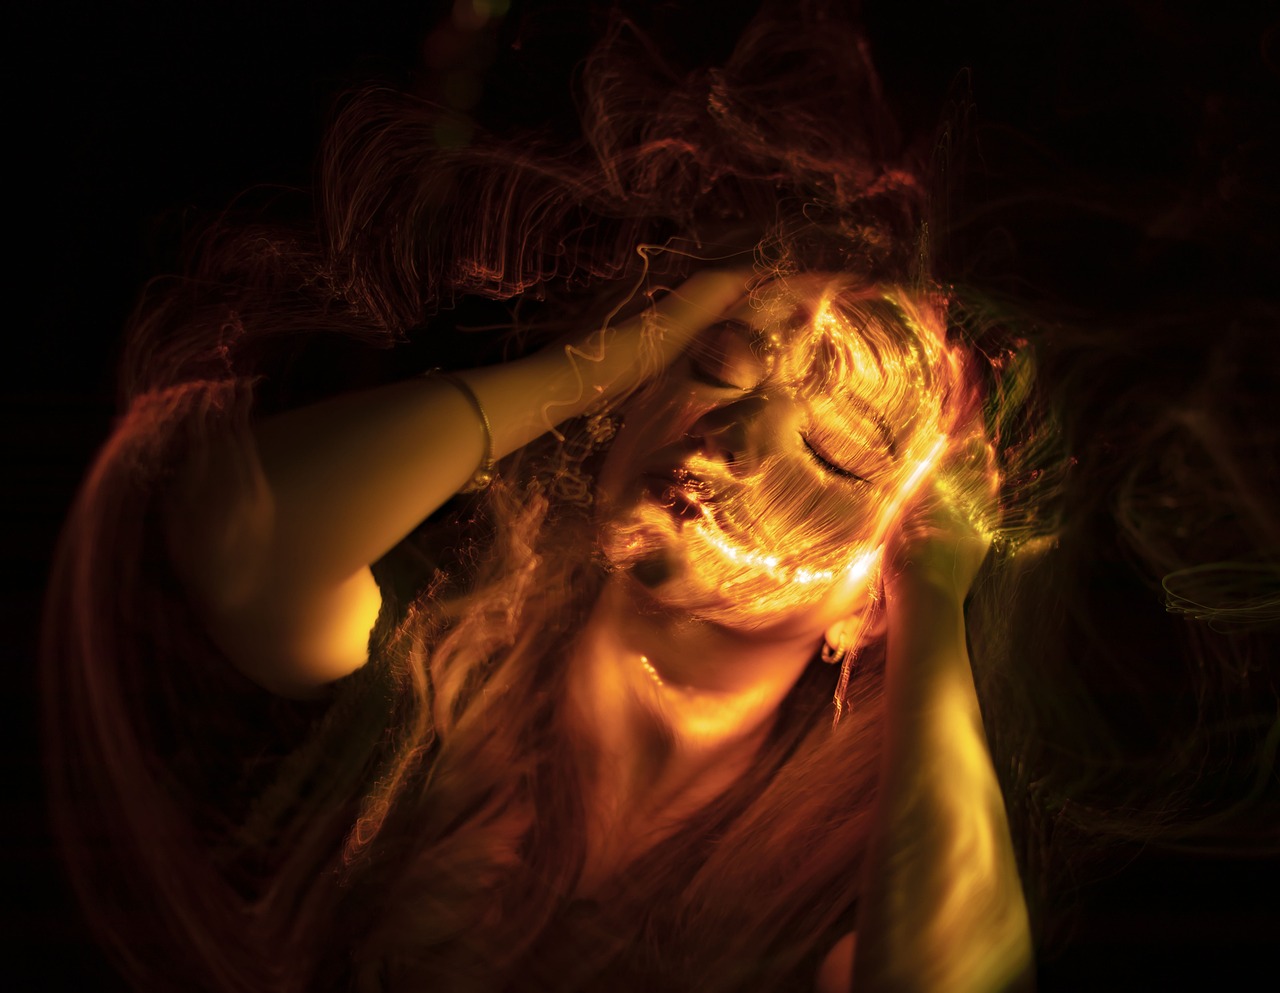 a woman with her hair blowing in the wind, a portrait, by Adam Marczyński, pexels, digital art, dramatic fire glow lighting, glowing yellow face, astral projection, headbanging